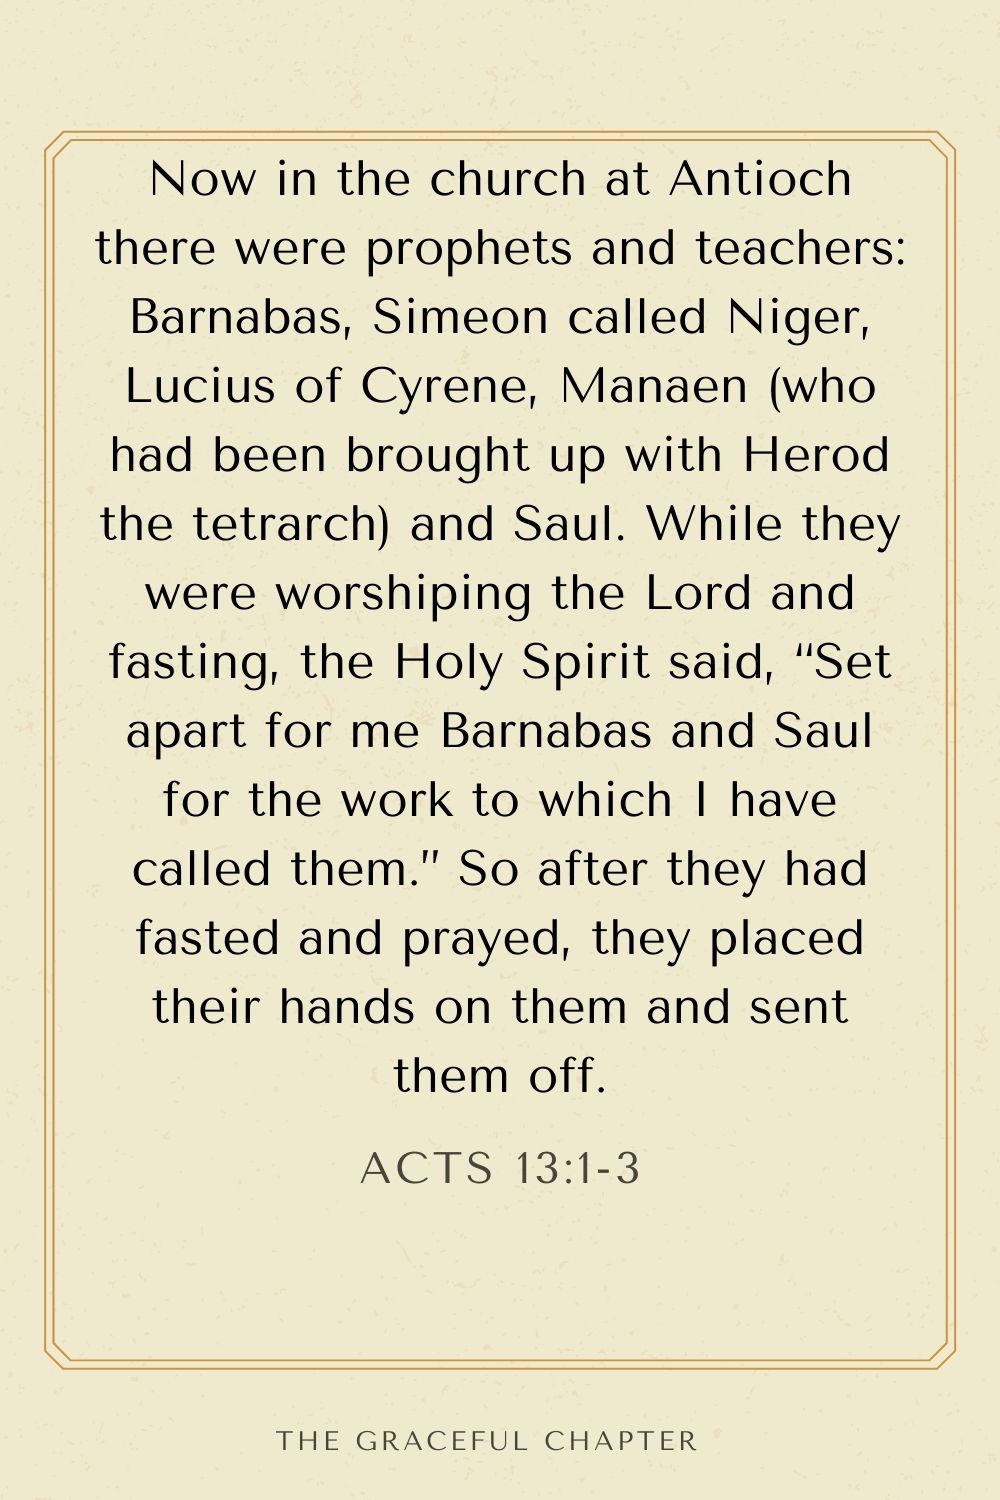 Now in the church at Antioch there were prophets and teachers: Barnabas, Simeon called Niger, Lucius of Cyrene, Manaen (who had been brought up with Herod the tetrarch) and Saul. While they were worshiping the Lord and fasting, the Holy Spirit said, “Set apart for me Barnabas and Saul for the work to which I have called them.” So after they had fasted and prayed, they placed their hands on them and sent them off. Acts 13:1-3